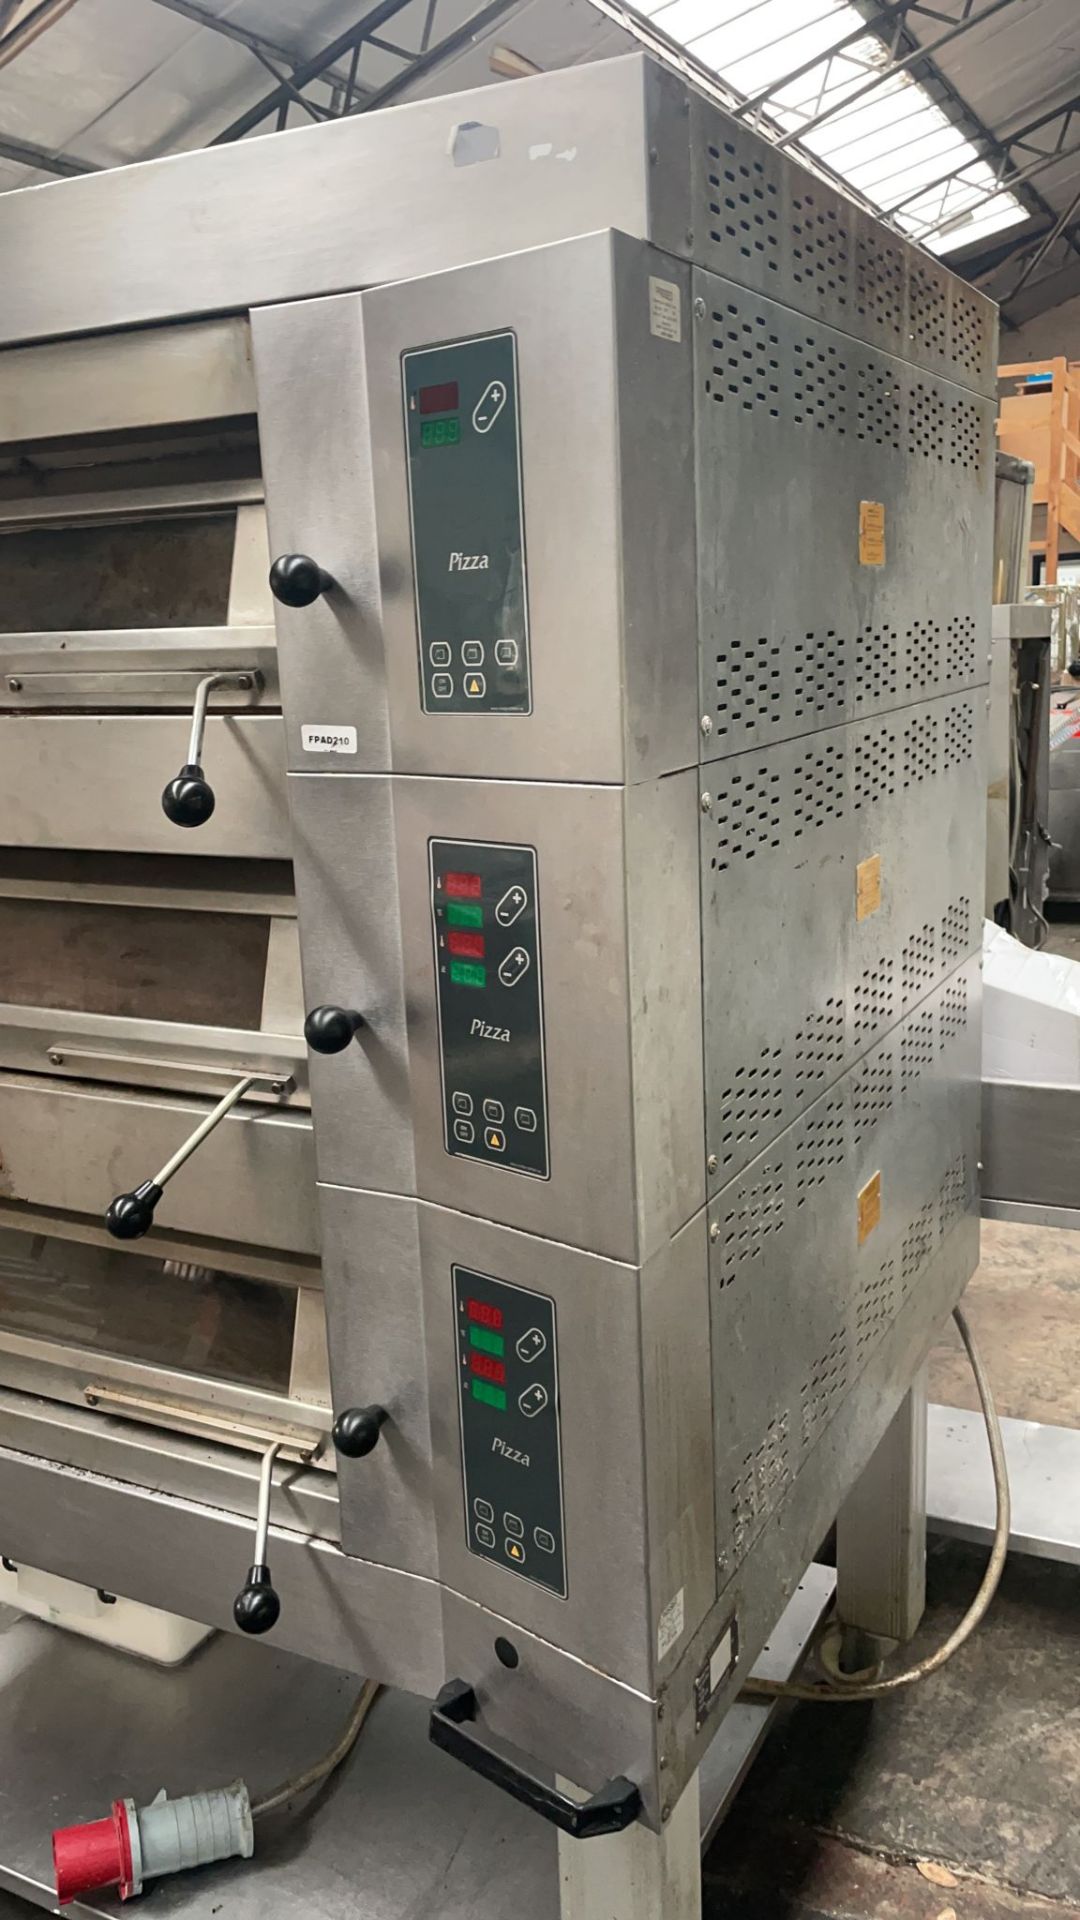 1 x Cuppone Tiziano Series Triple Deck Electric Pizza Oven - 3 Phase - Model TZ435/2M - 2015 Model - - Image 11 of 11